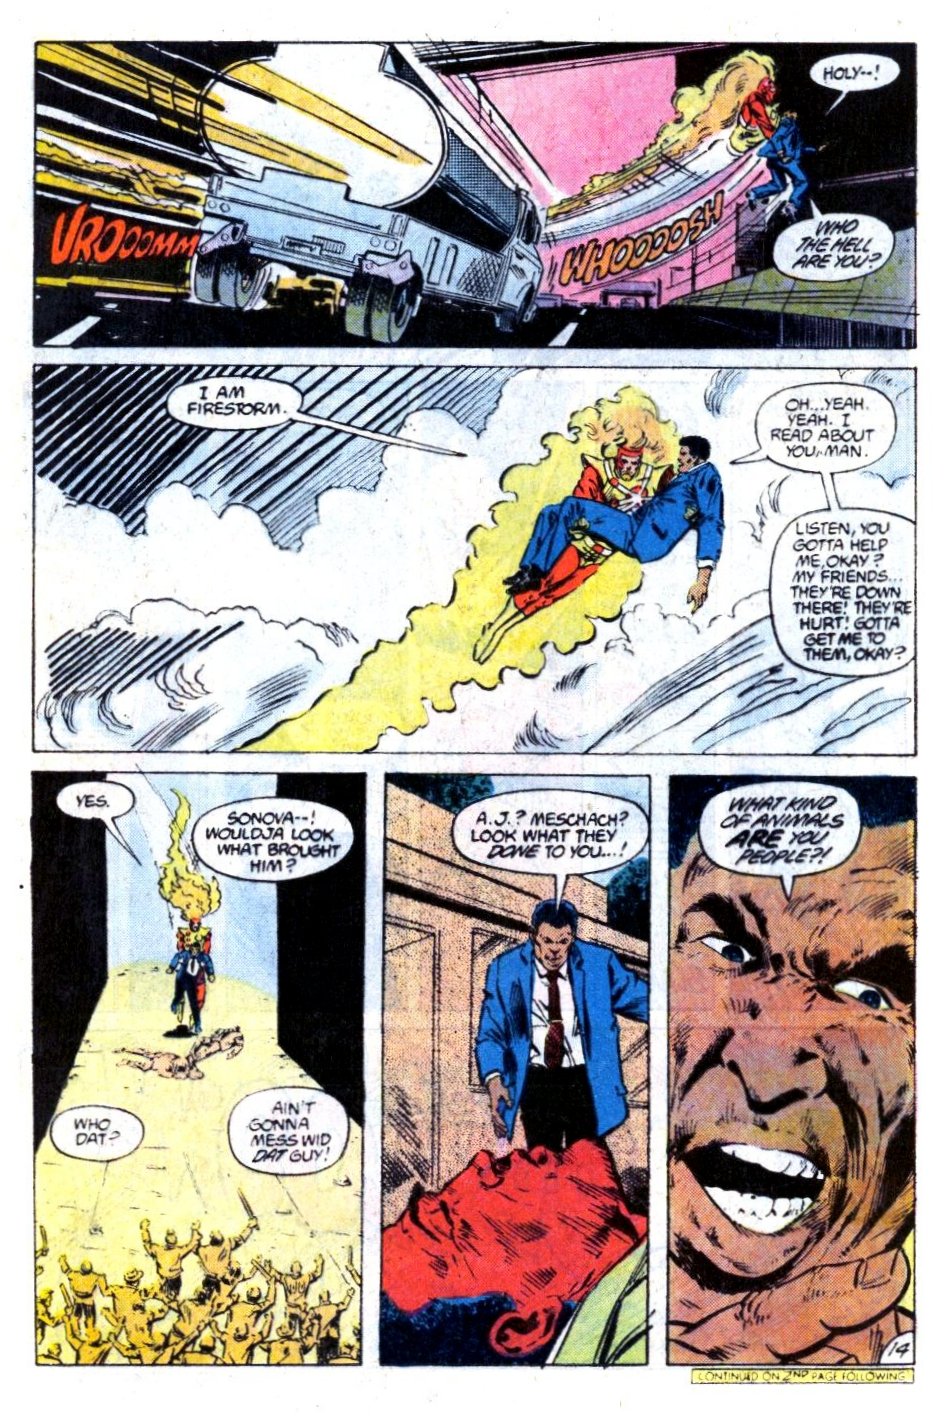 Firestorm, the Nuclear Man Issue #66 #2 - English 15